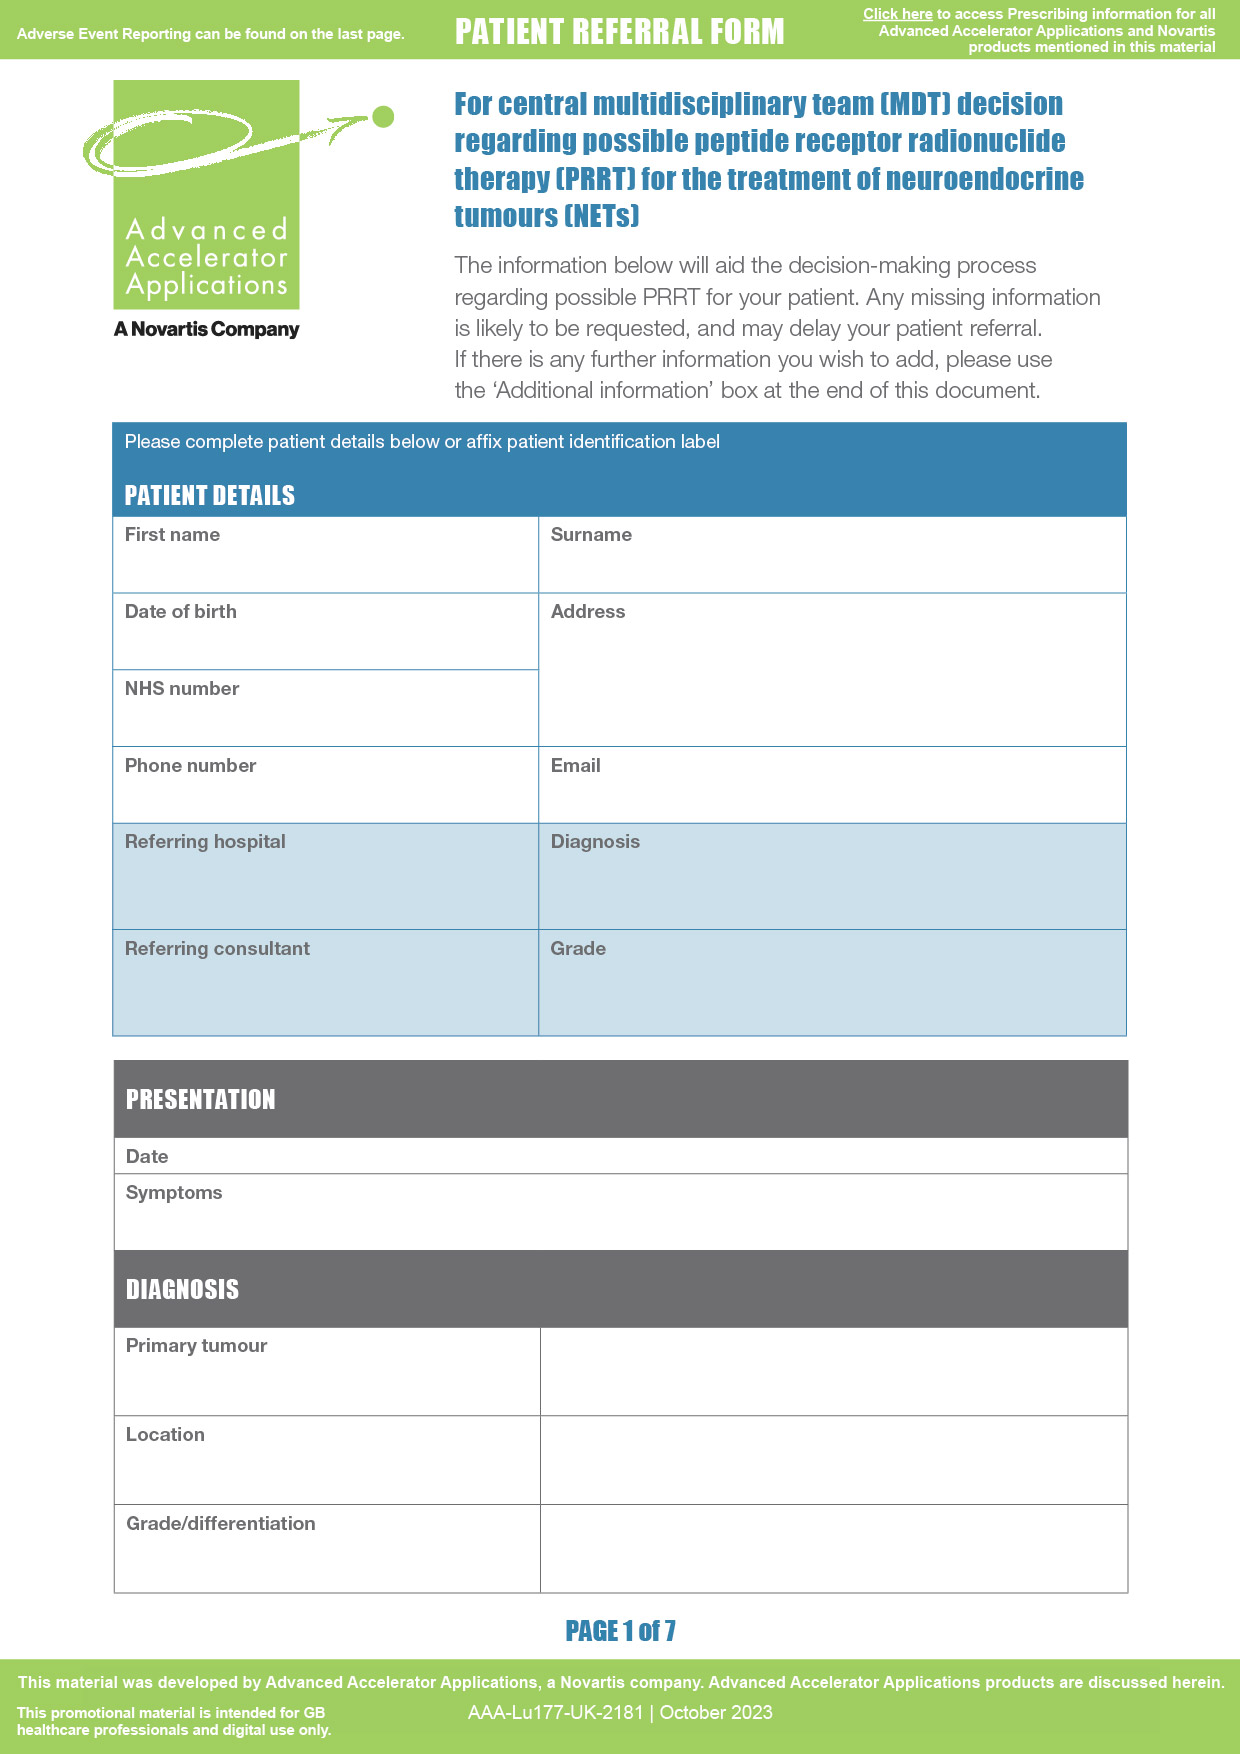 Preview image of the patient referral form